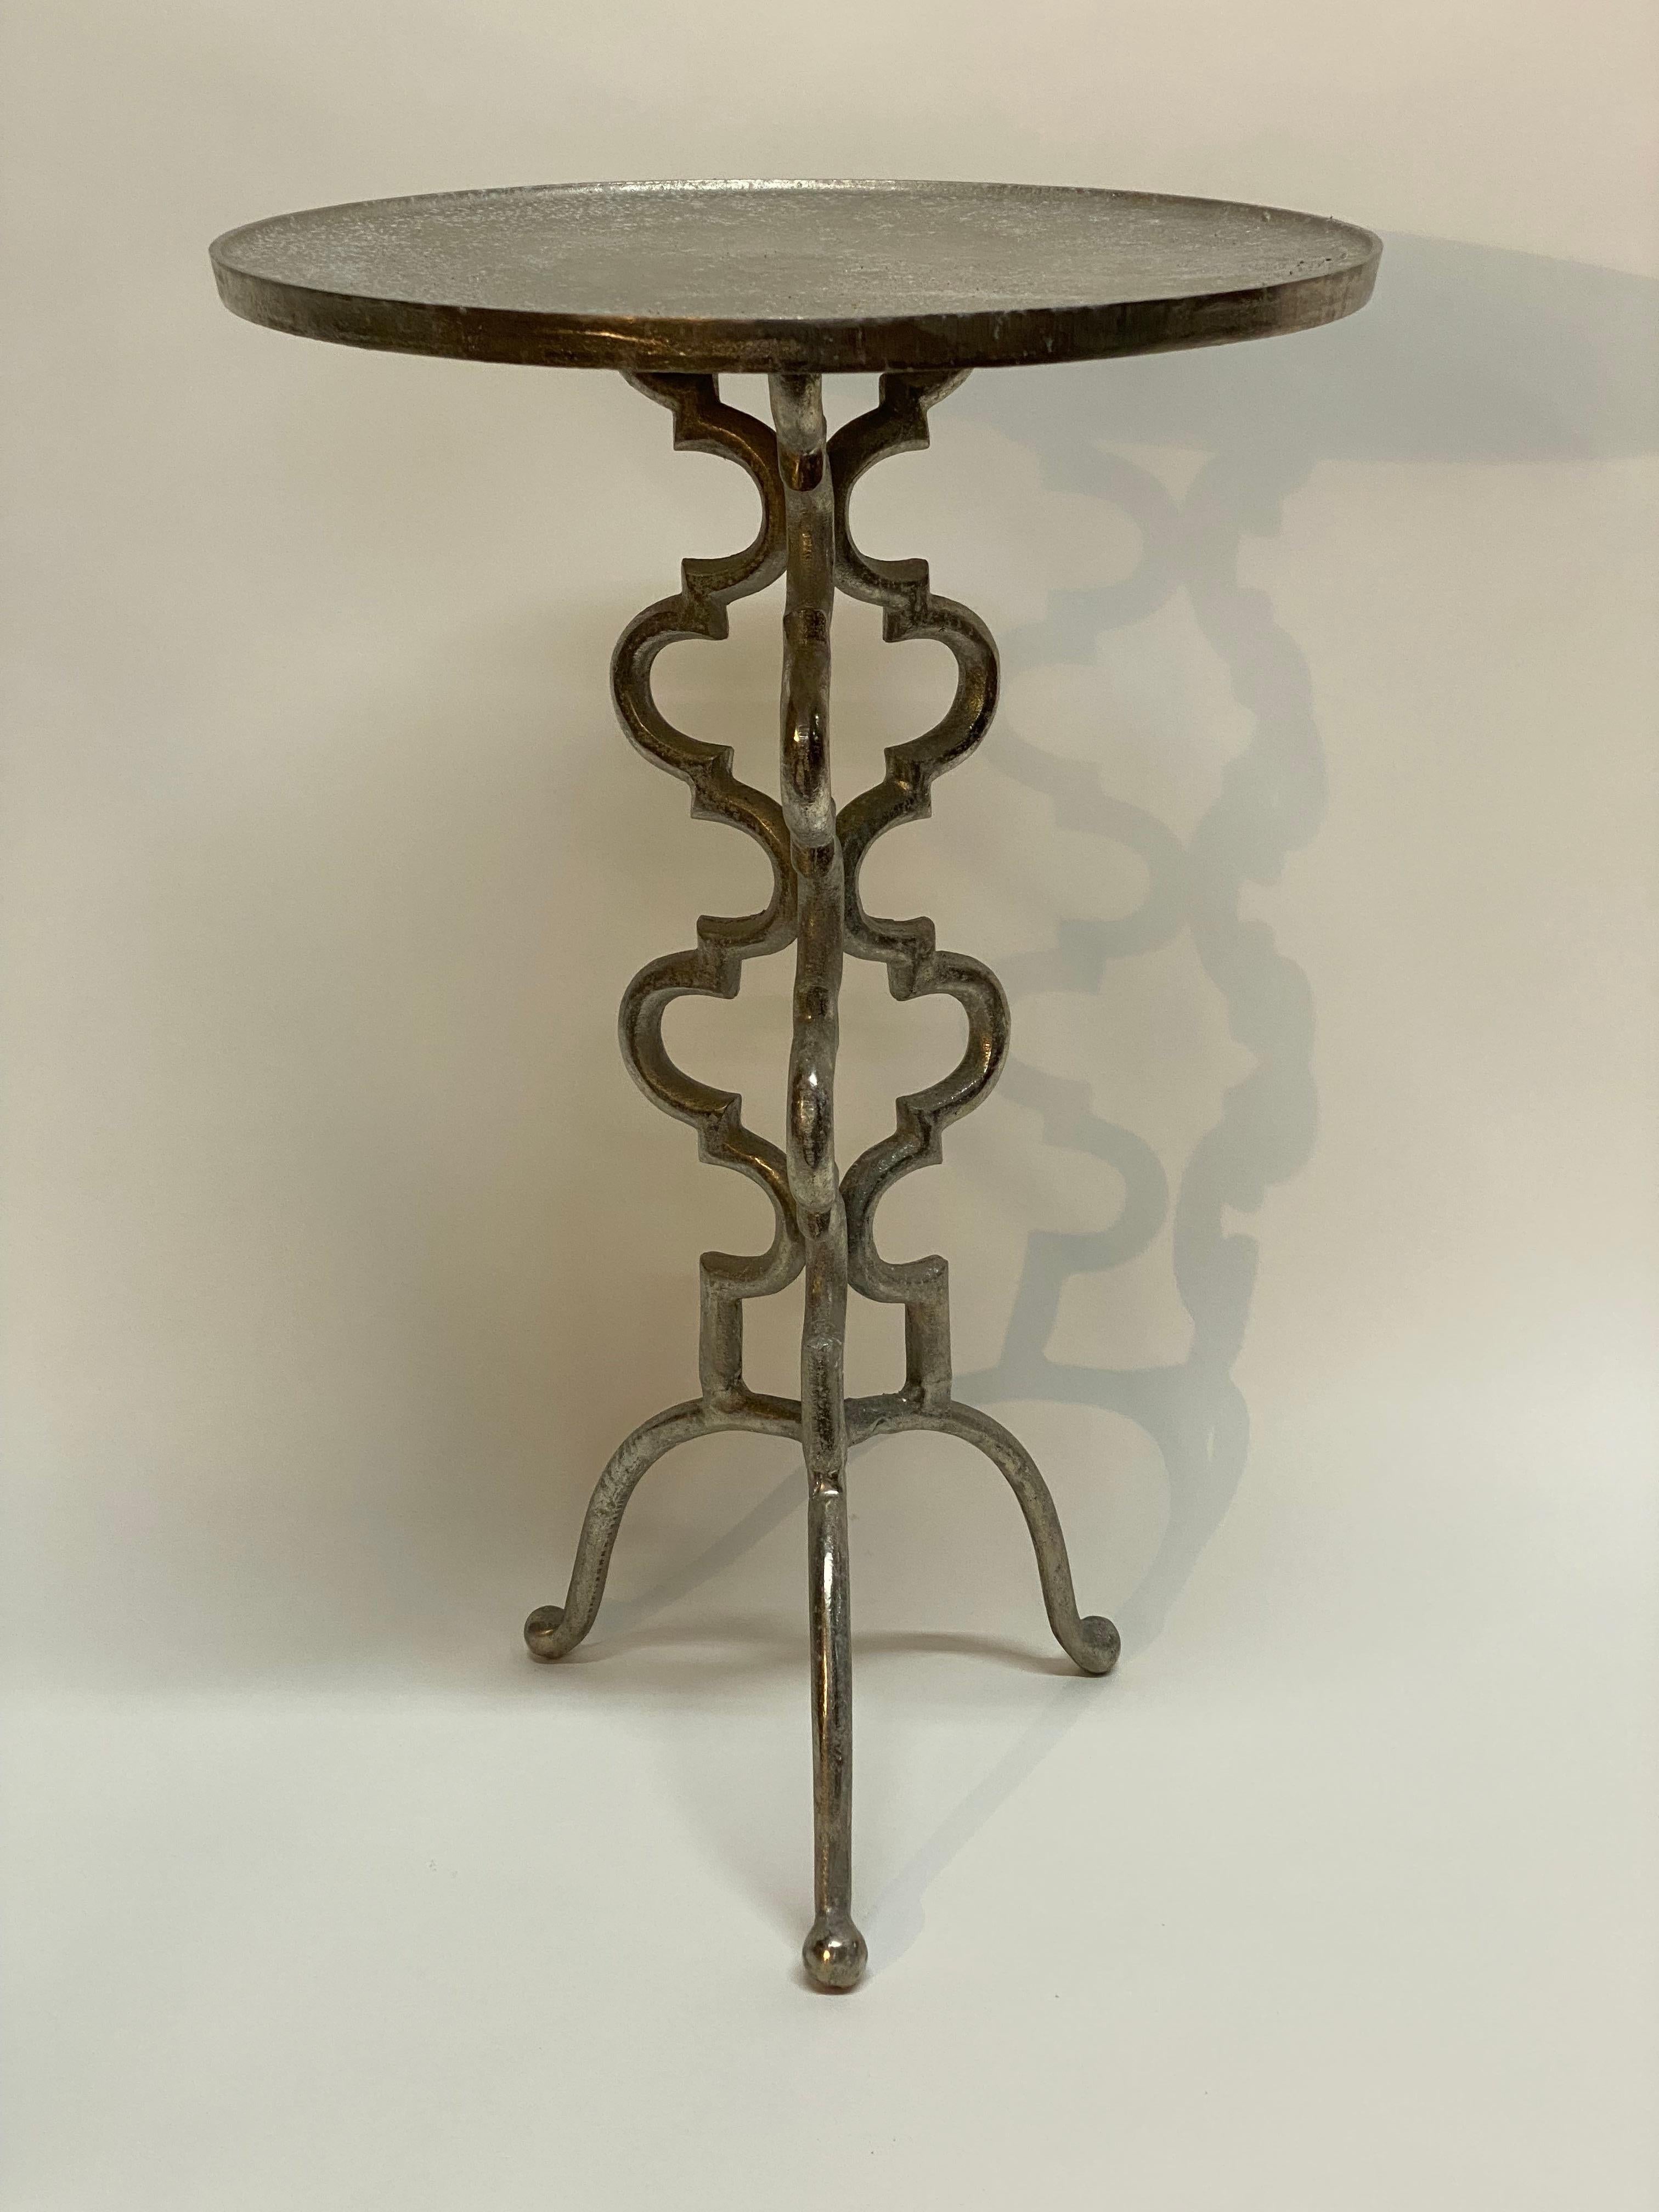 1970s Tall Cast Aluminum Brutalist Accent Table In Good Condition For Sale In Garnerville, NY